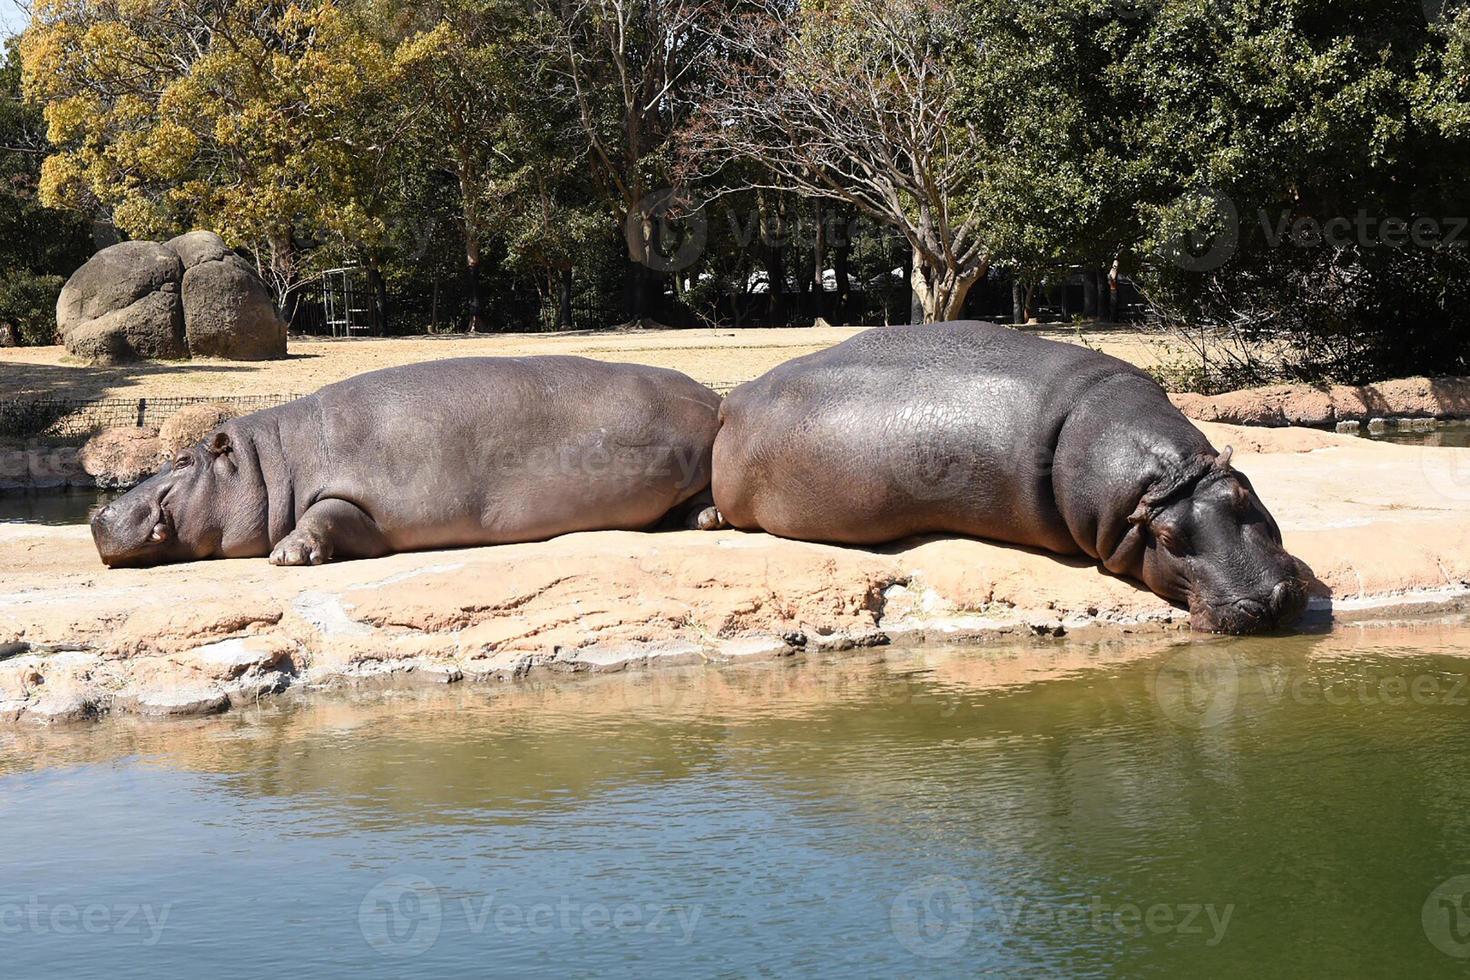 two hippopotamus are sunbathing and sleeping on the edge of the water in the cage photo